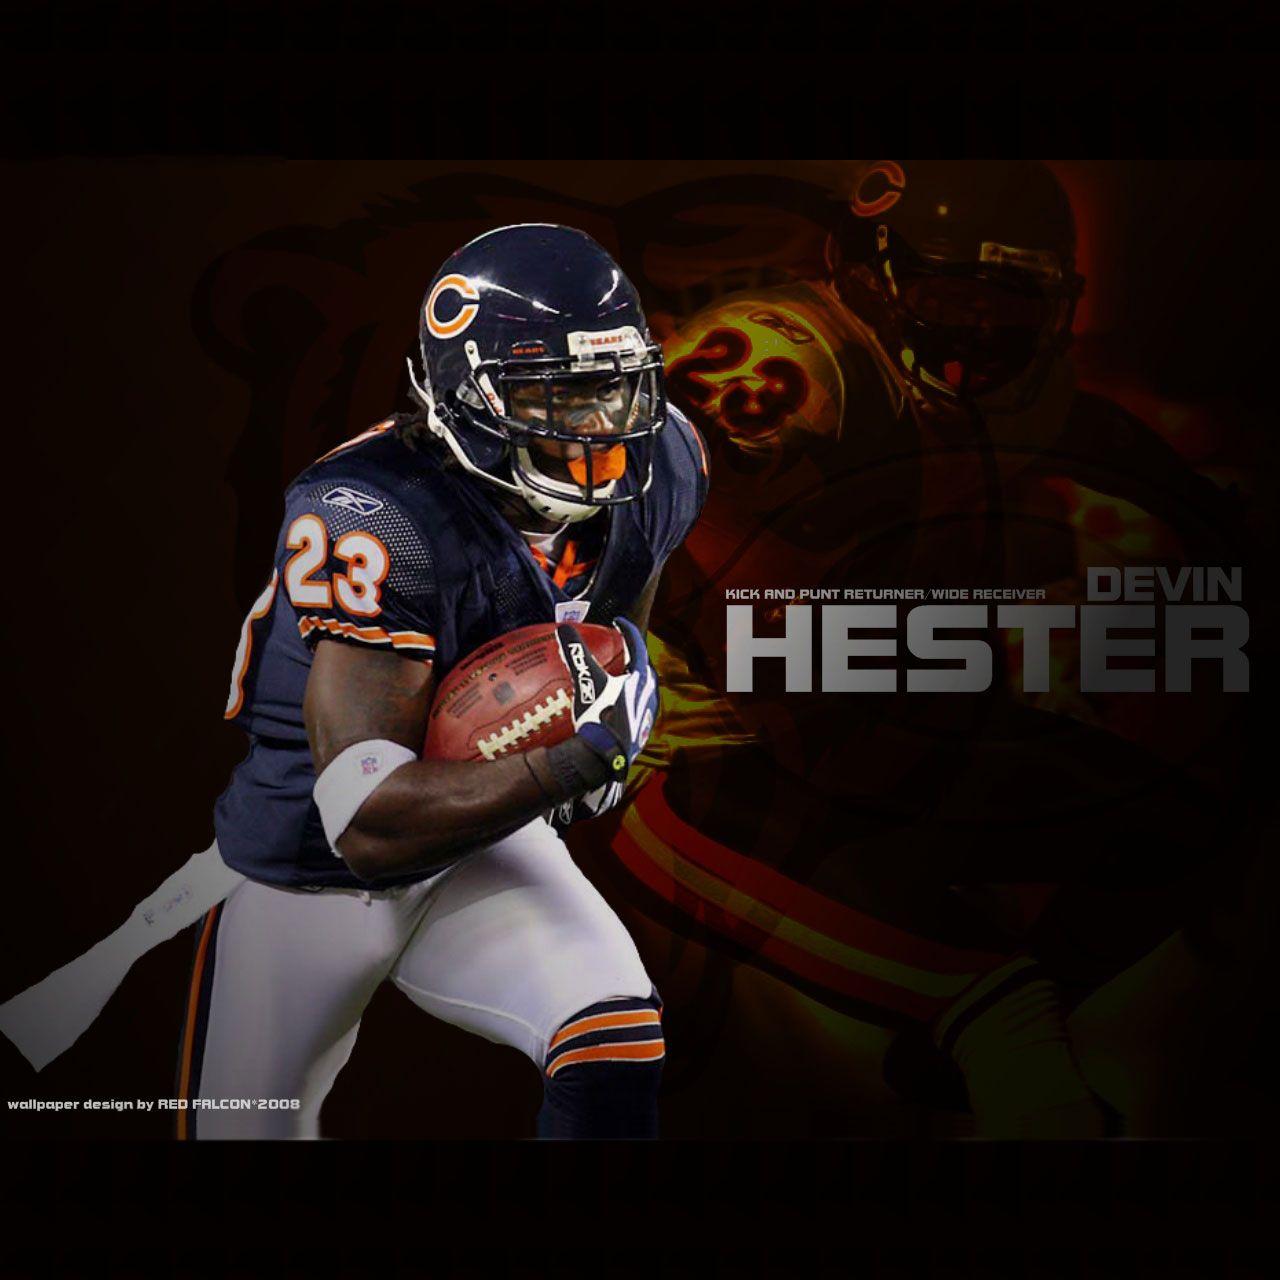 Chicago Bears Devin Hester 23 Tablet wallpaper and background